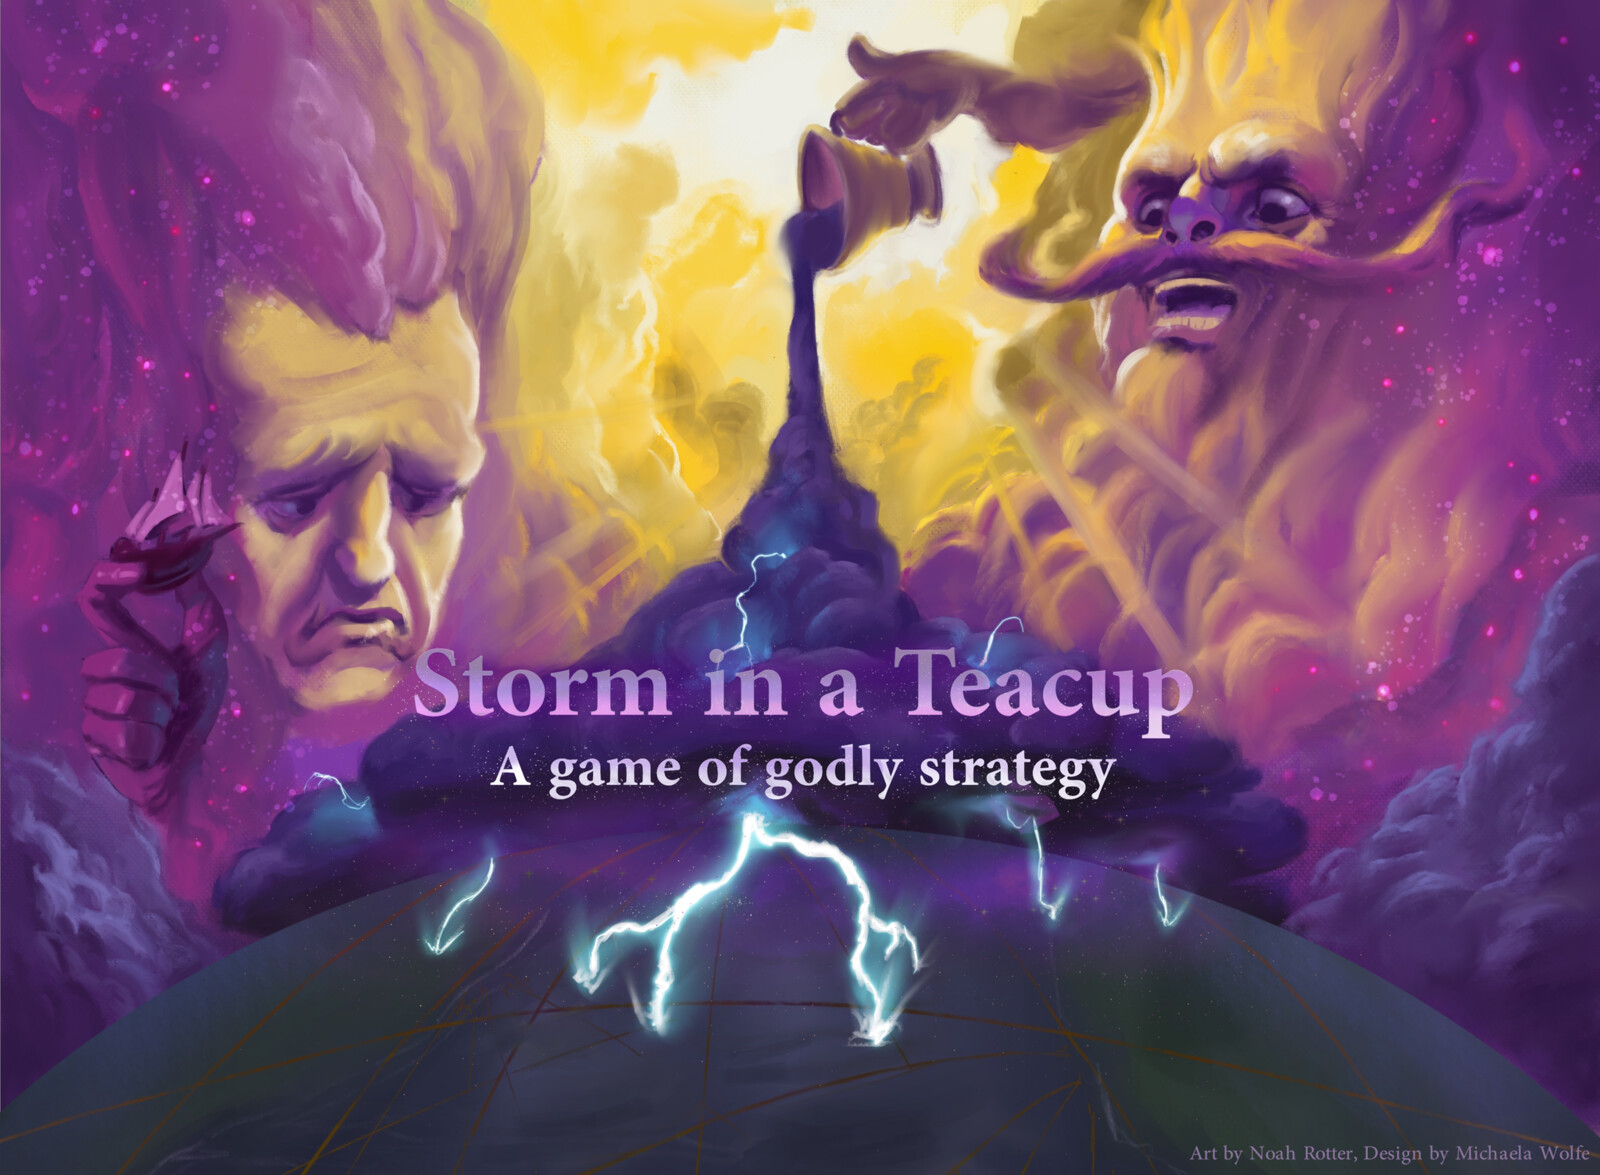 Storm in a Teacup: A Game of Godly Strategy